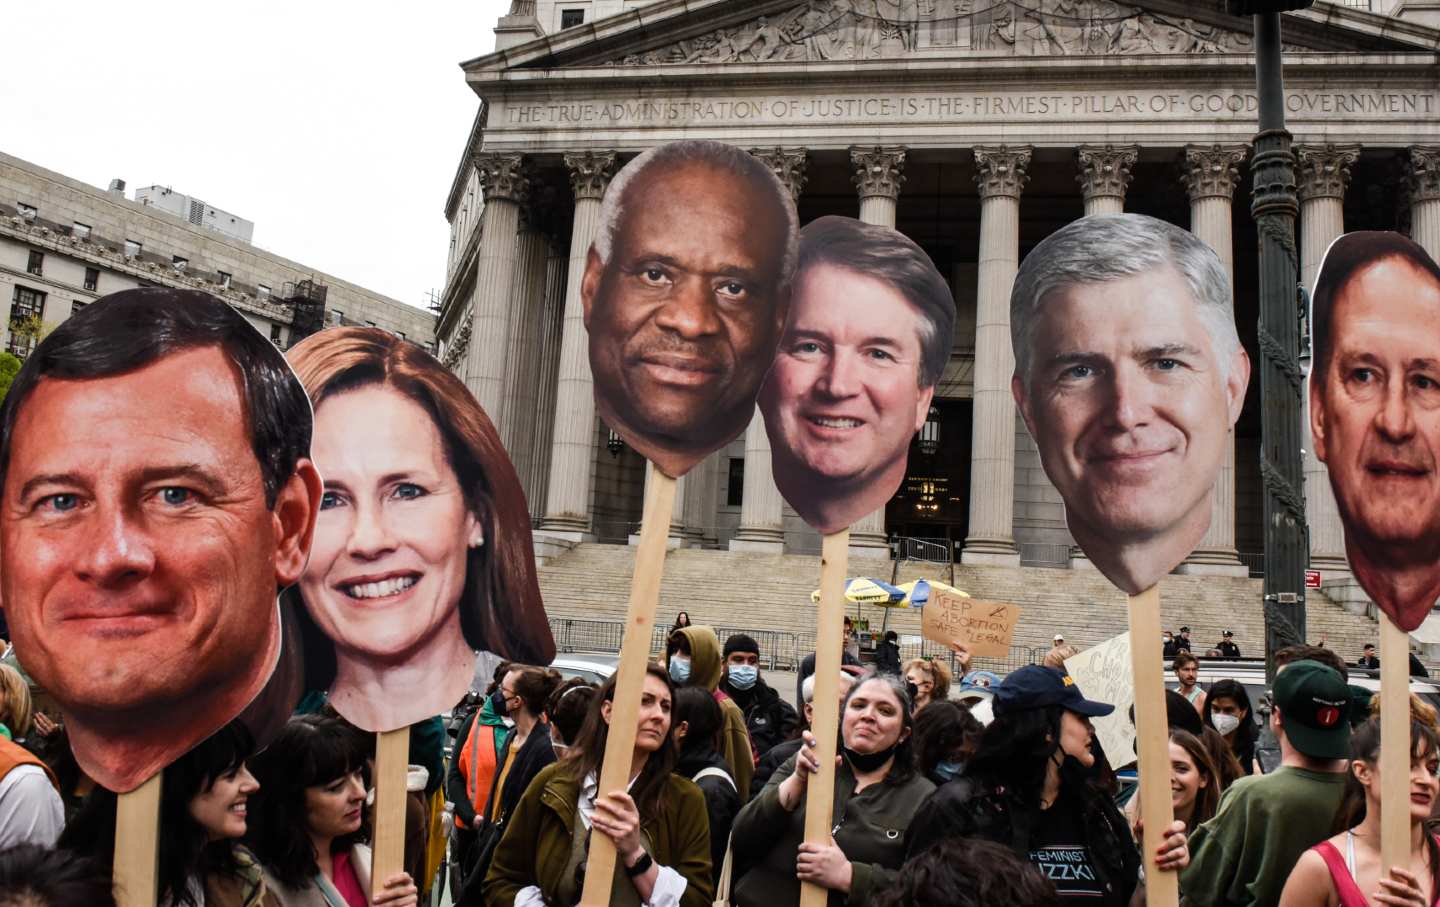 Demonstrators carry signs of the six conservative Supreme Court justices during a protest in New York in 2022.